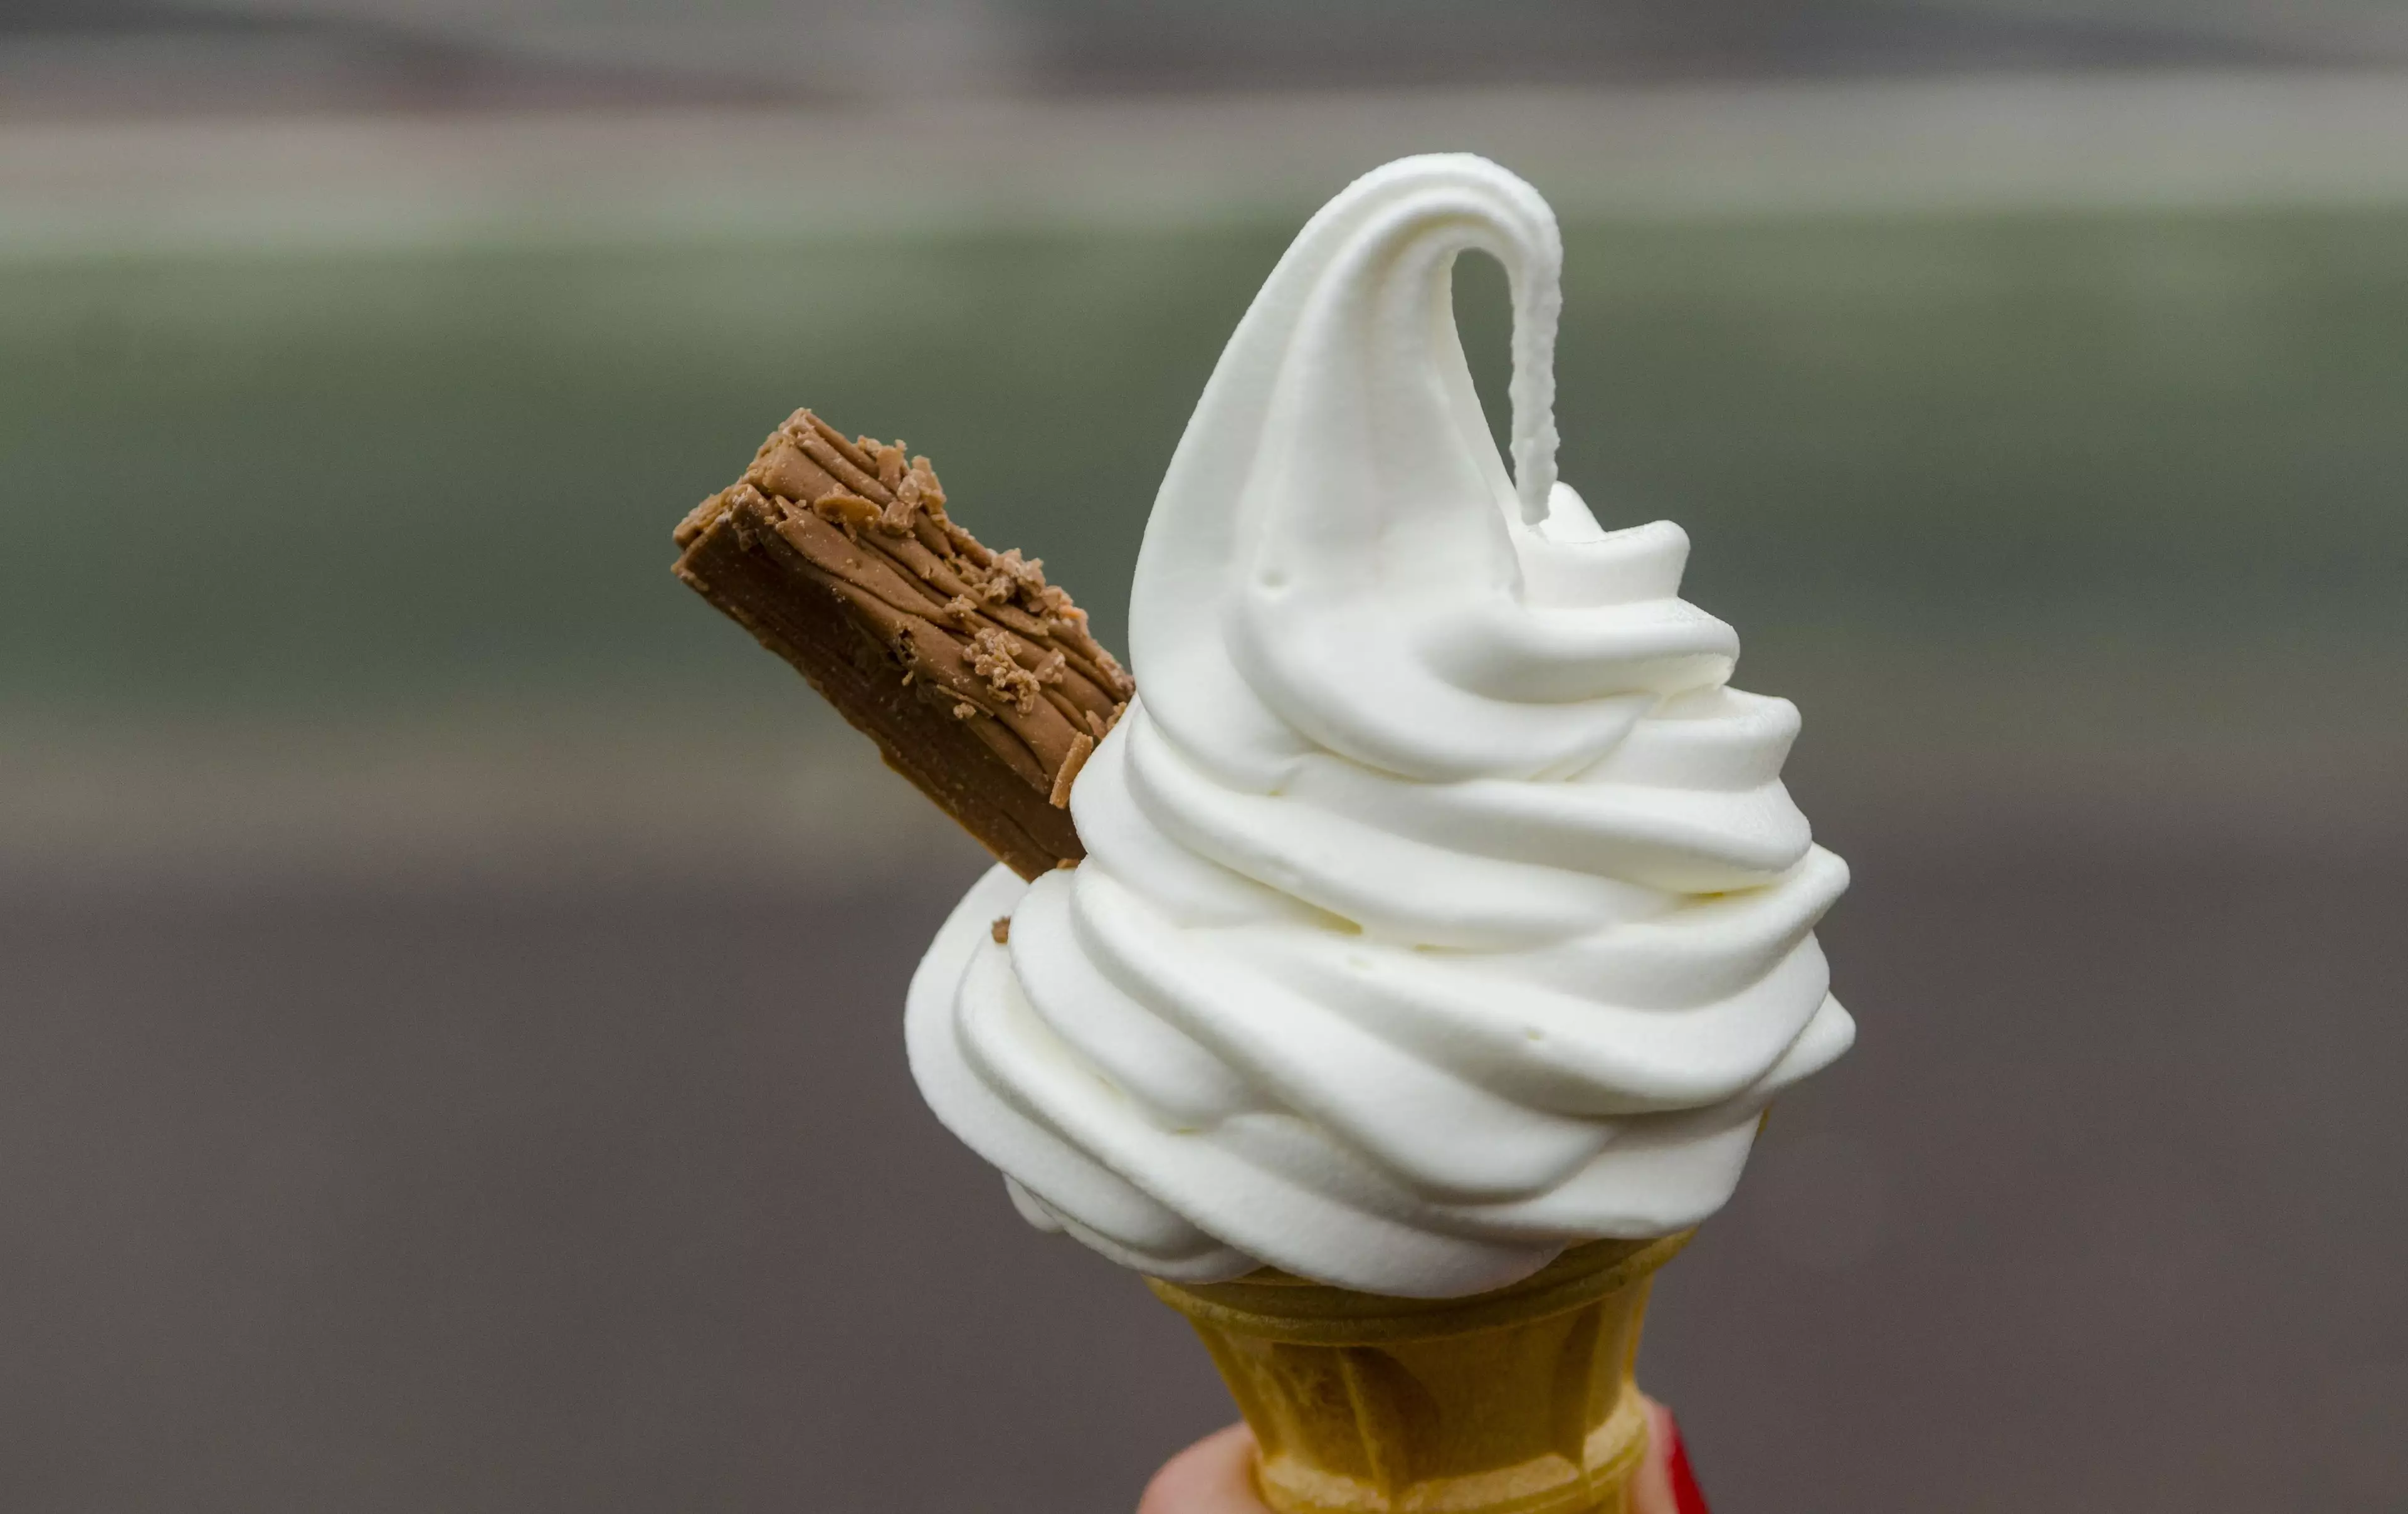 Cadbury said there has been a big increase in demand over the last few weeks for the 99 Flake (